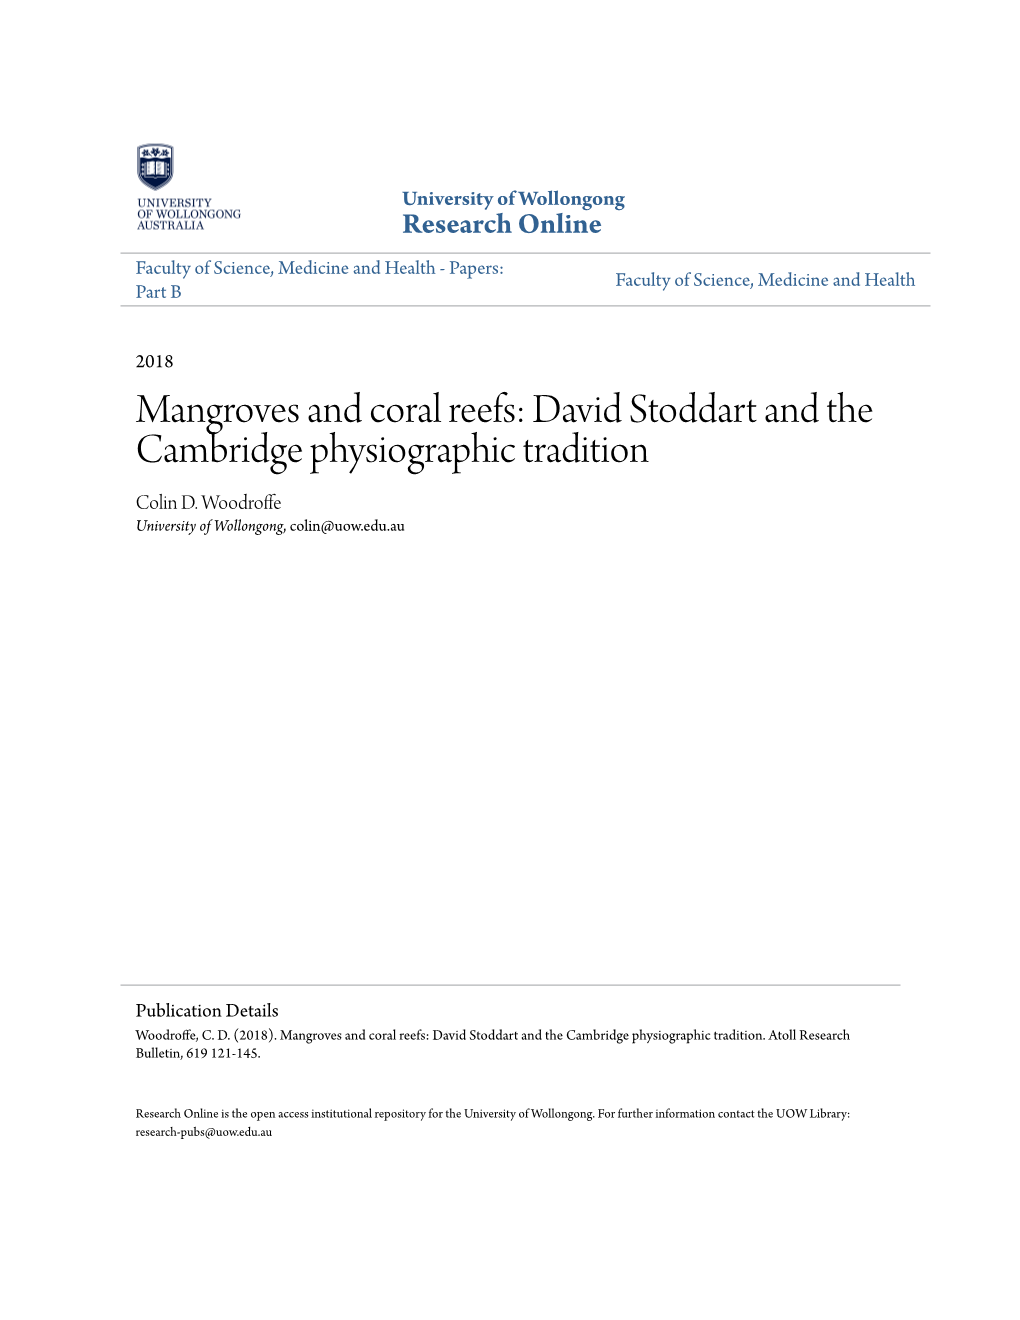 Mangroves and Coral Reefs: David Stoddart and the Cambridge Physiographic Tradition Colin D